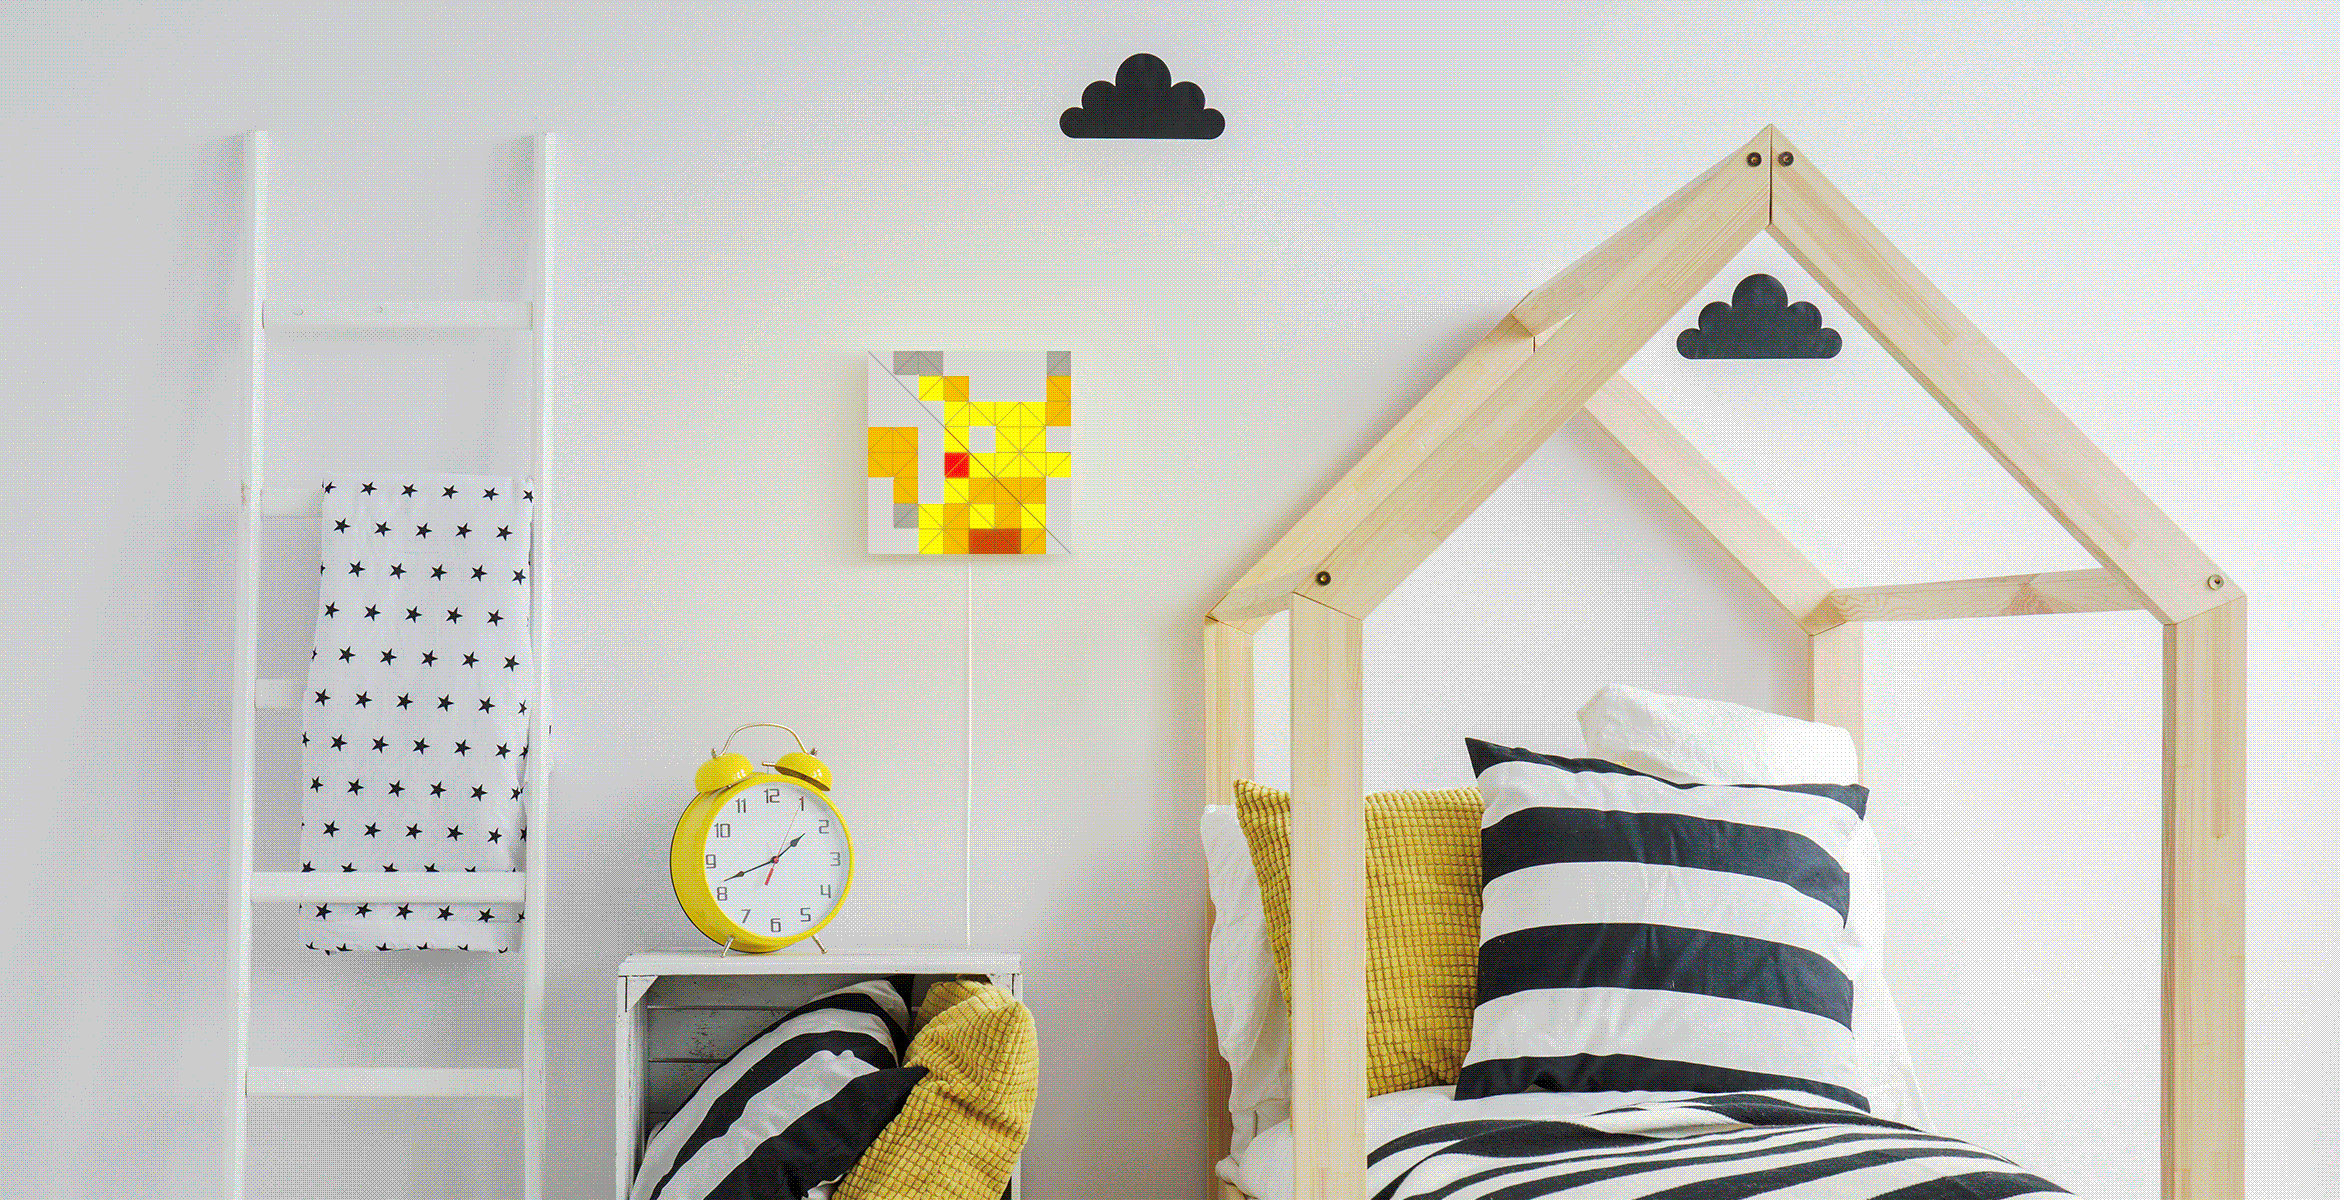 SKY face shape, assembled from 4 smart light surfaces, displays Pikachu light effect and complements kids room interior